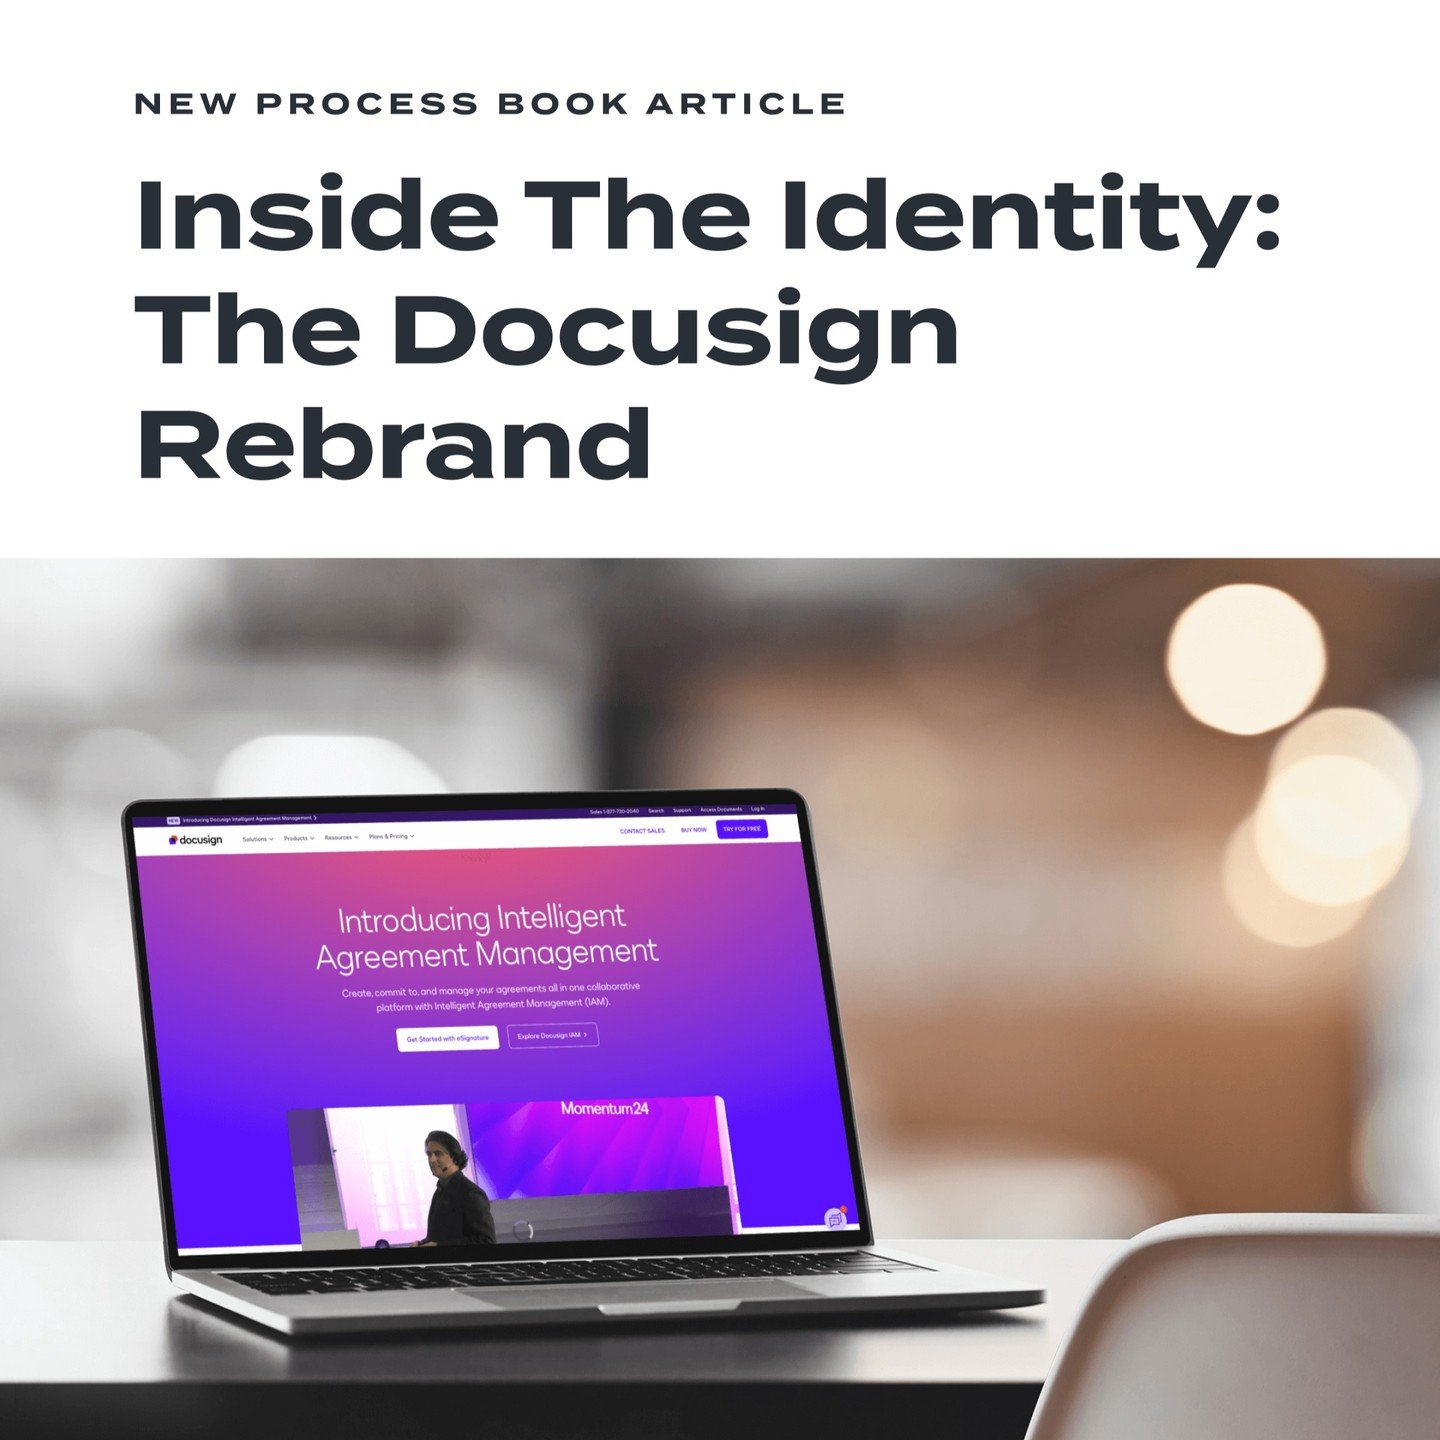 Three weeks ago, @docusign unveiled their new branding, done by their extremely talented Creative + Branding Team.
.
Our thoughts? Not only is the rebrand extremely successful across all aspects of branding &amp; marketing practice, but it could easi